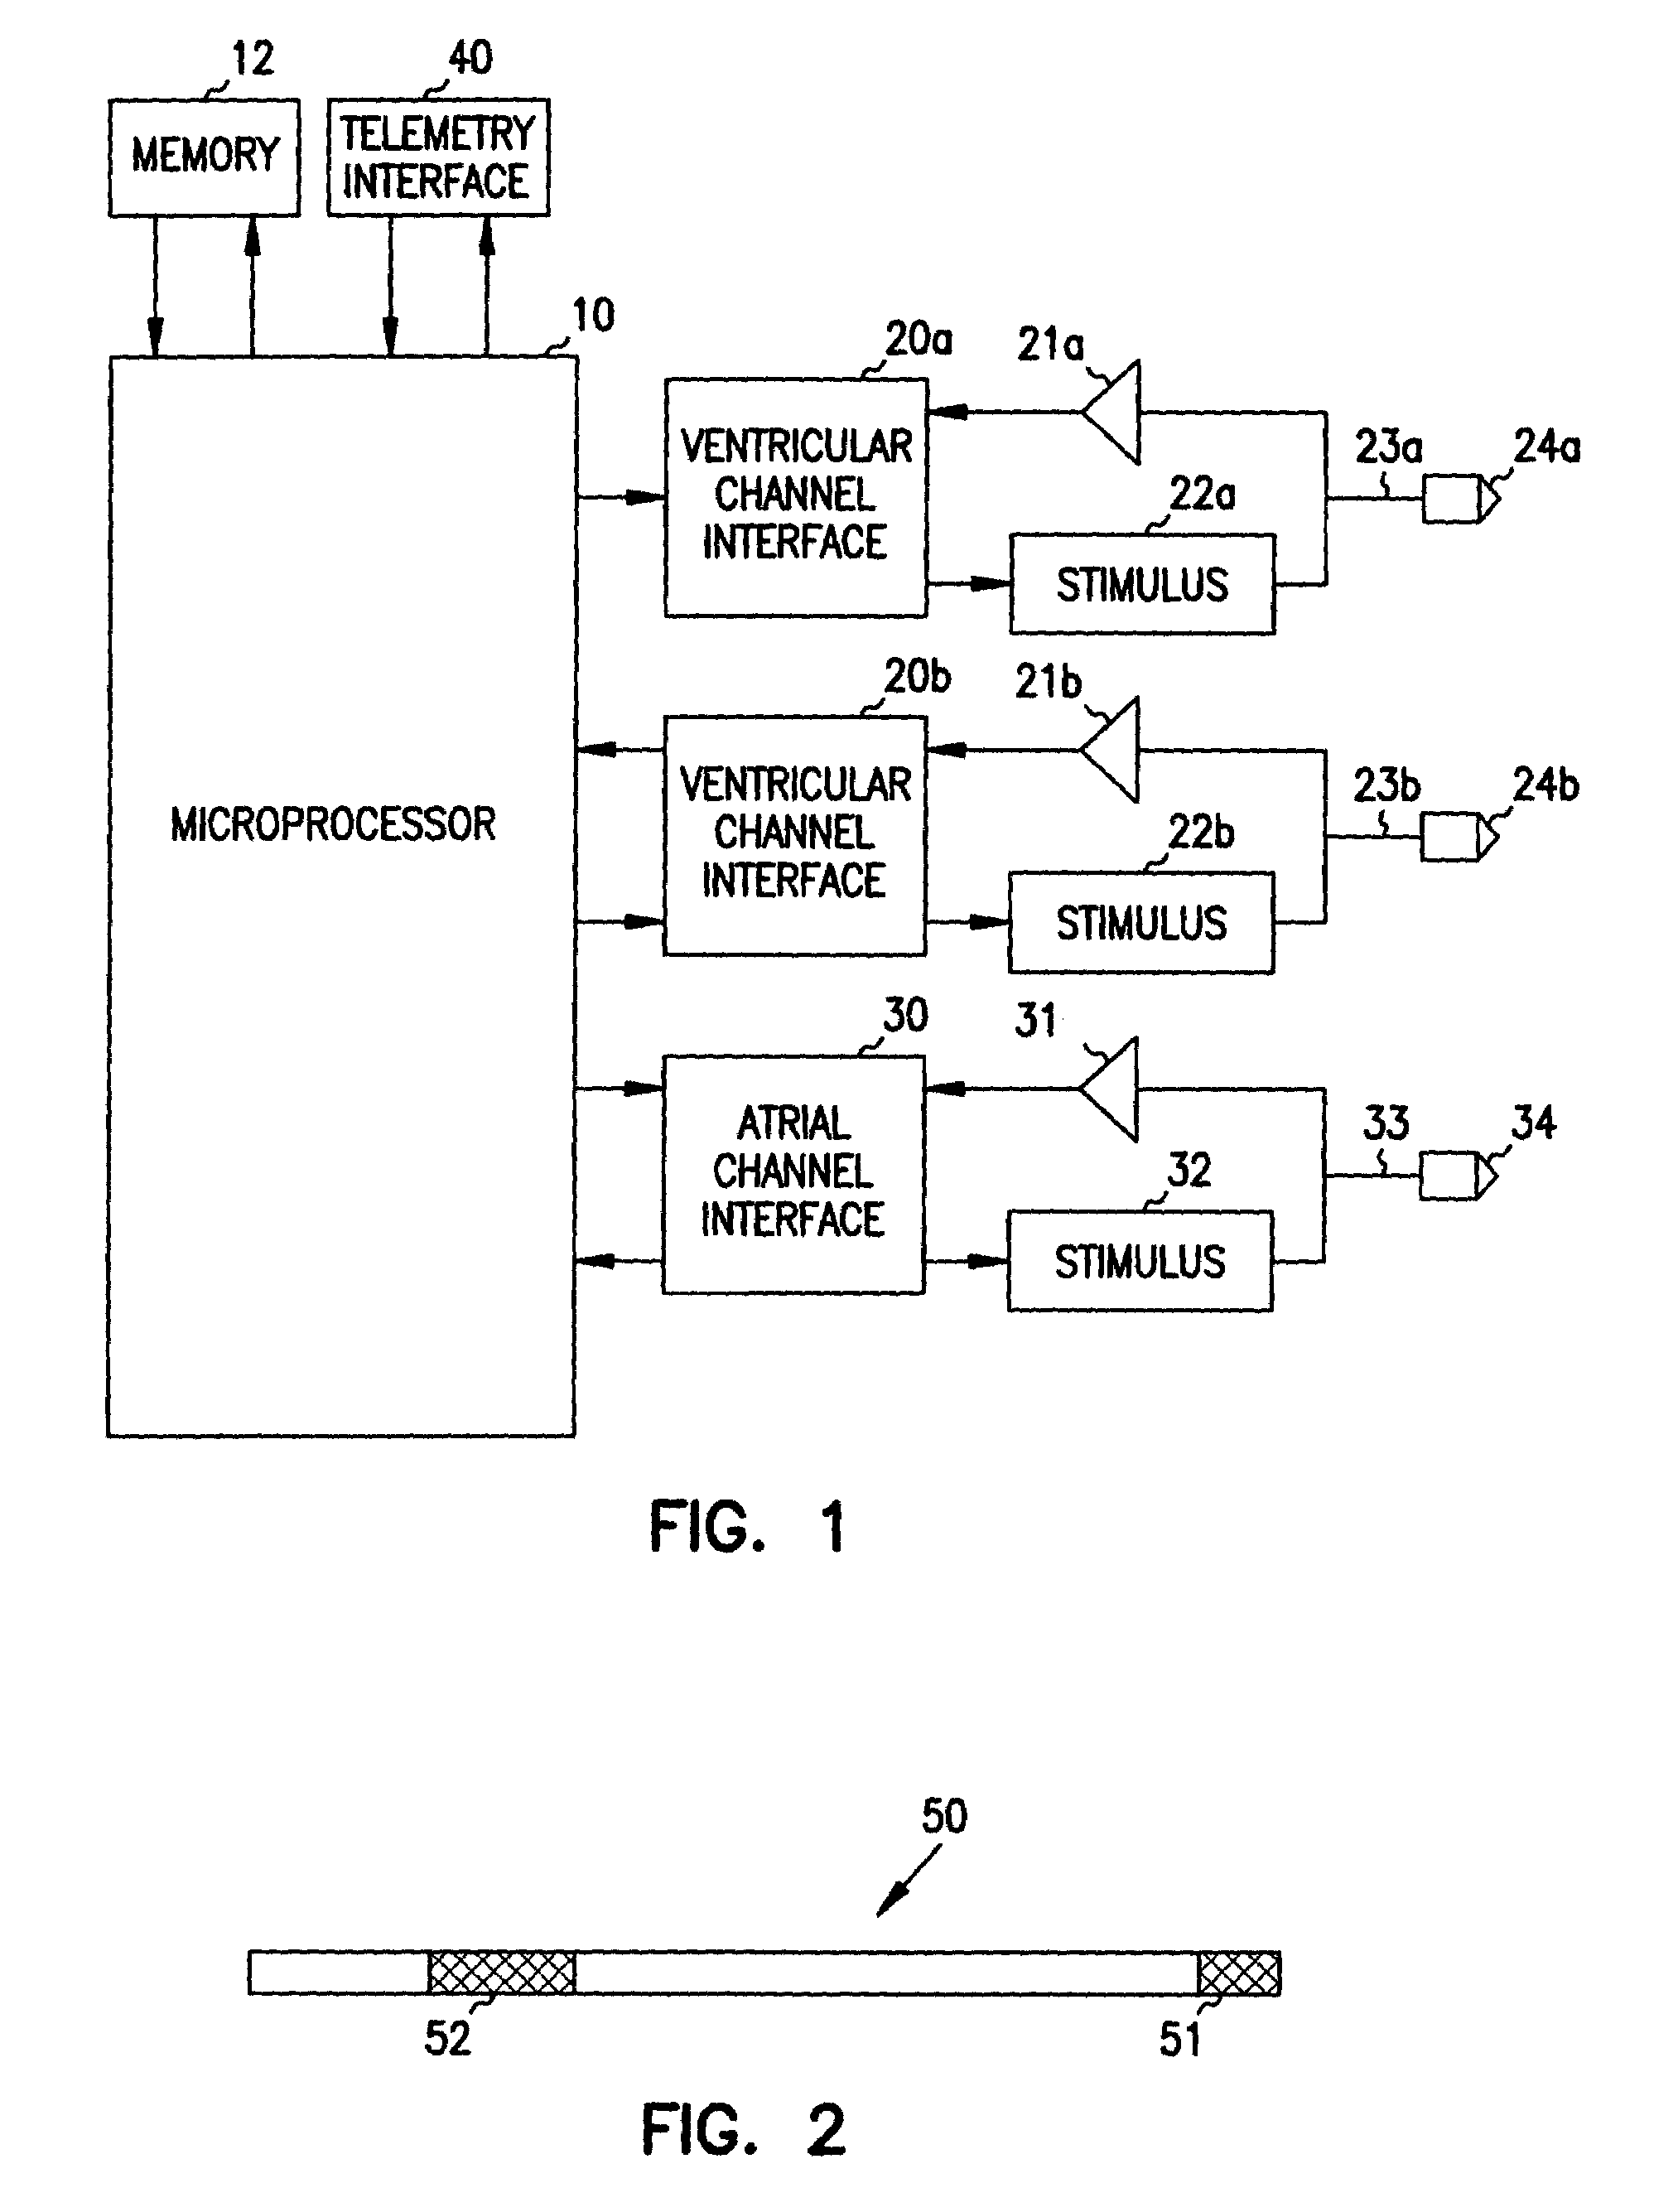 Apparatus and method for spatially and temporally distributing cardiac electrical stimulation